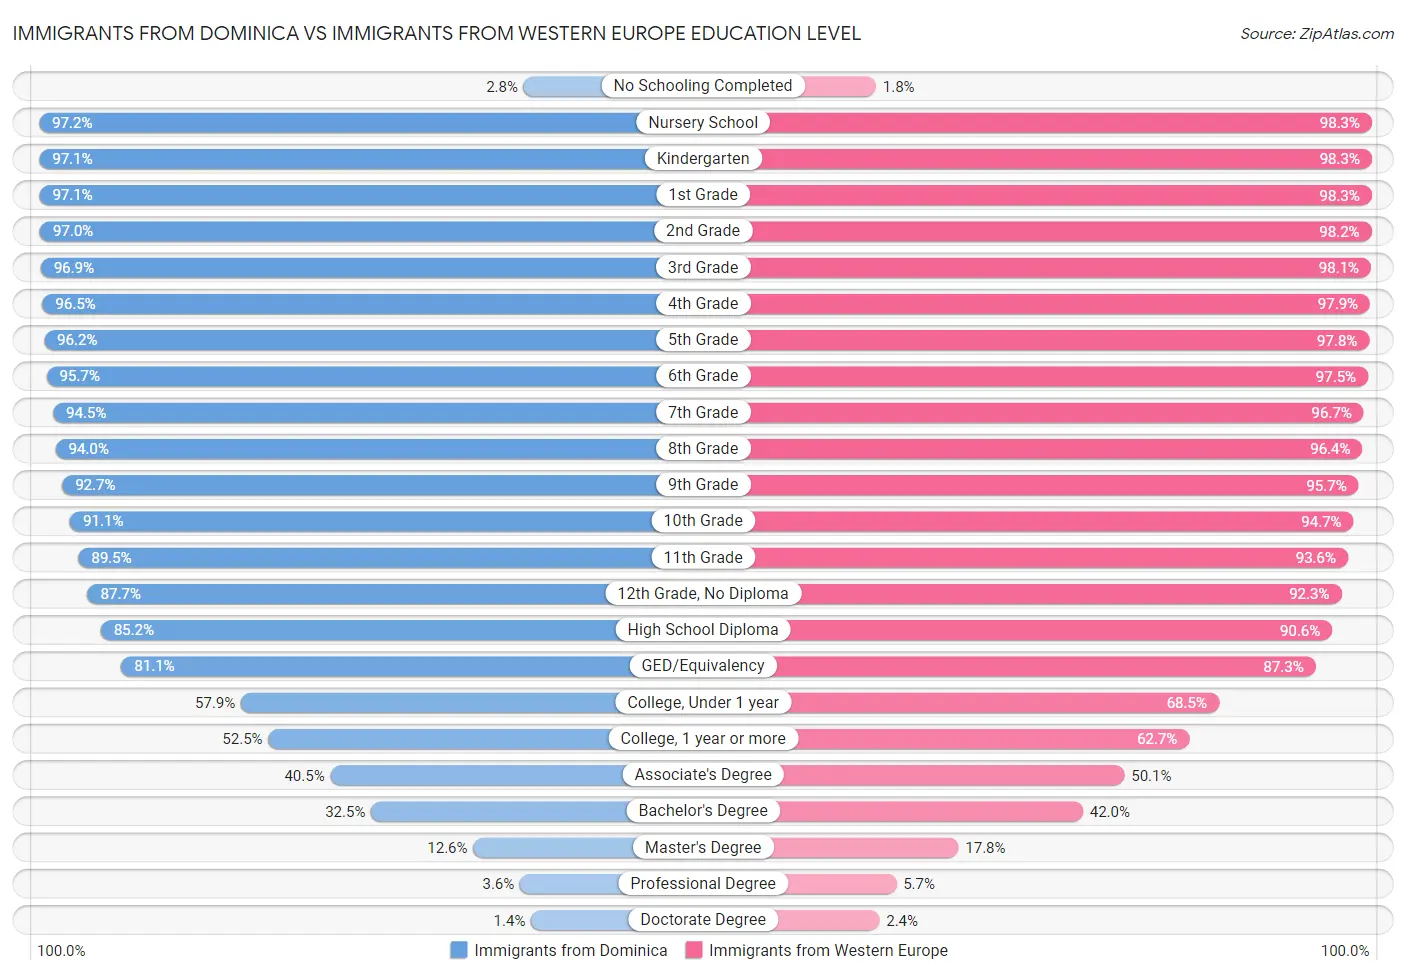 Immigrants from Dominica vs Immigrants from Western Europe Education Level